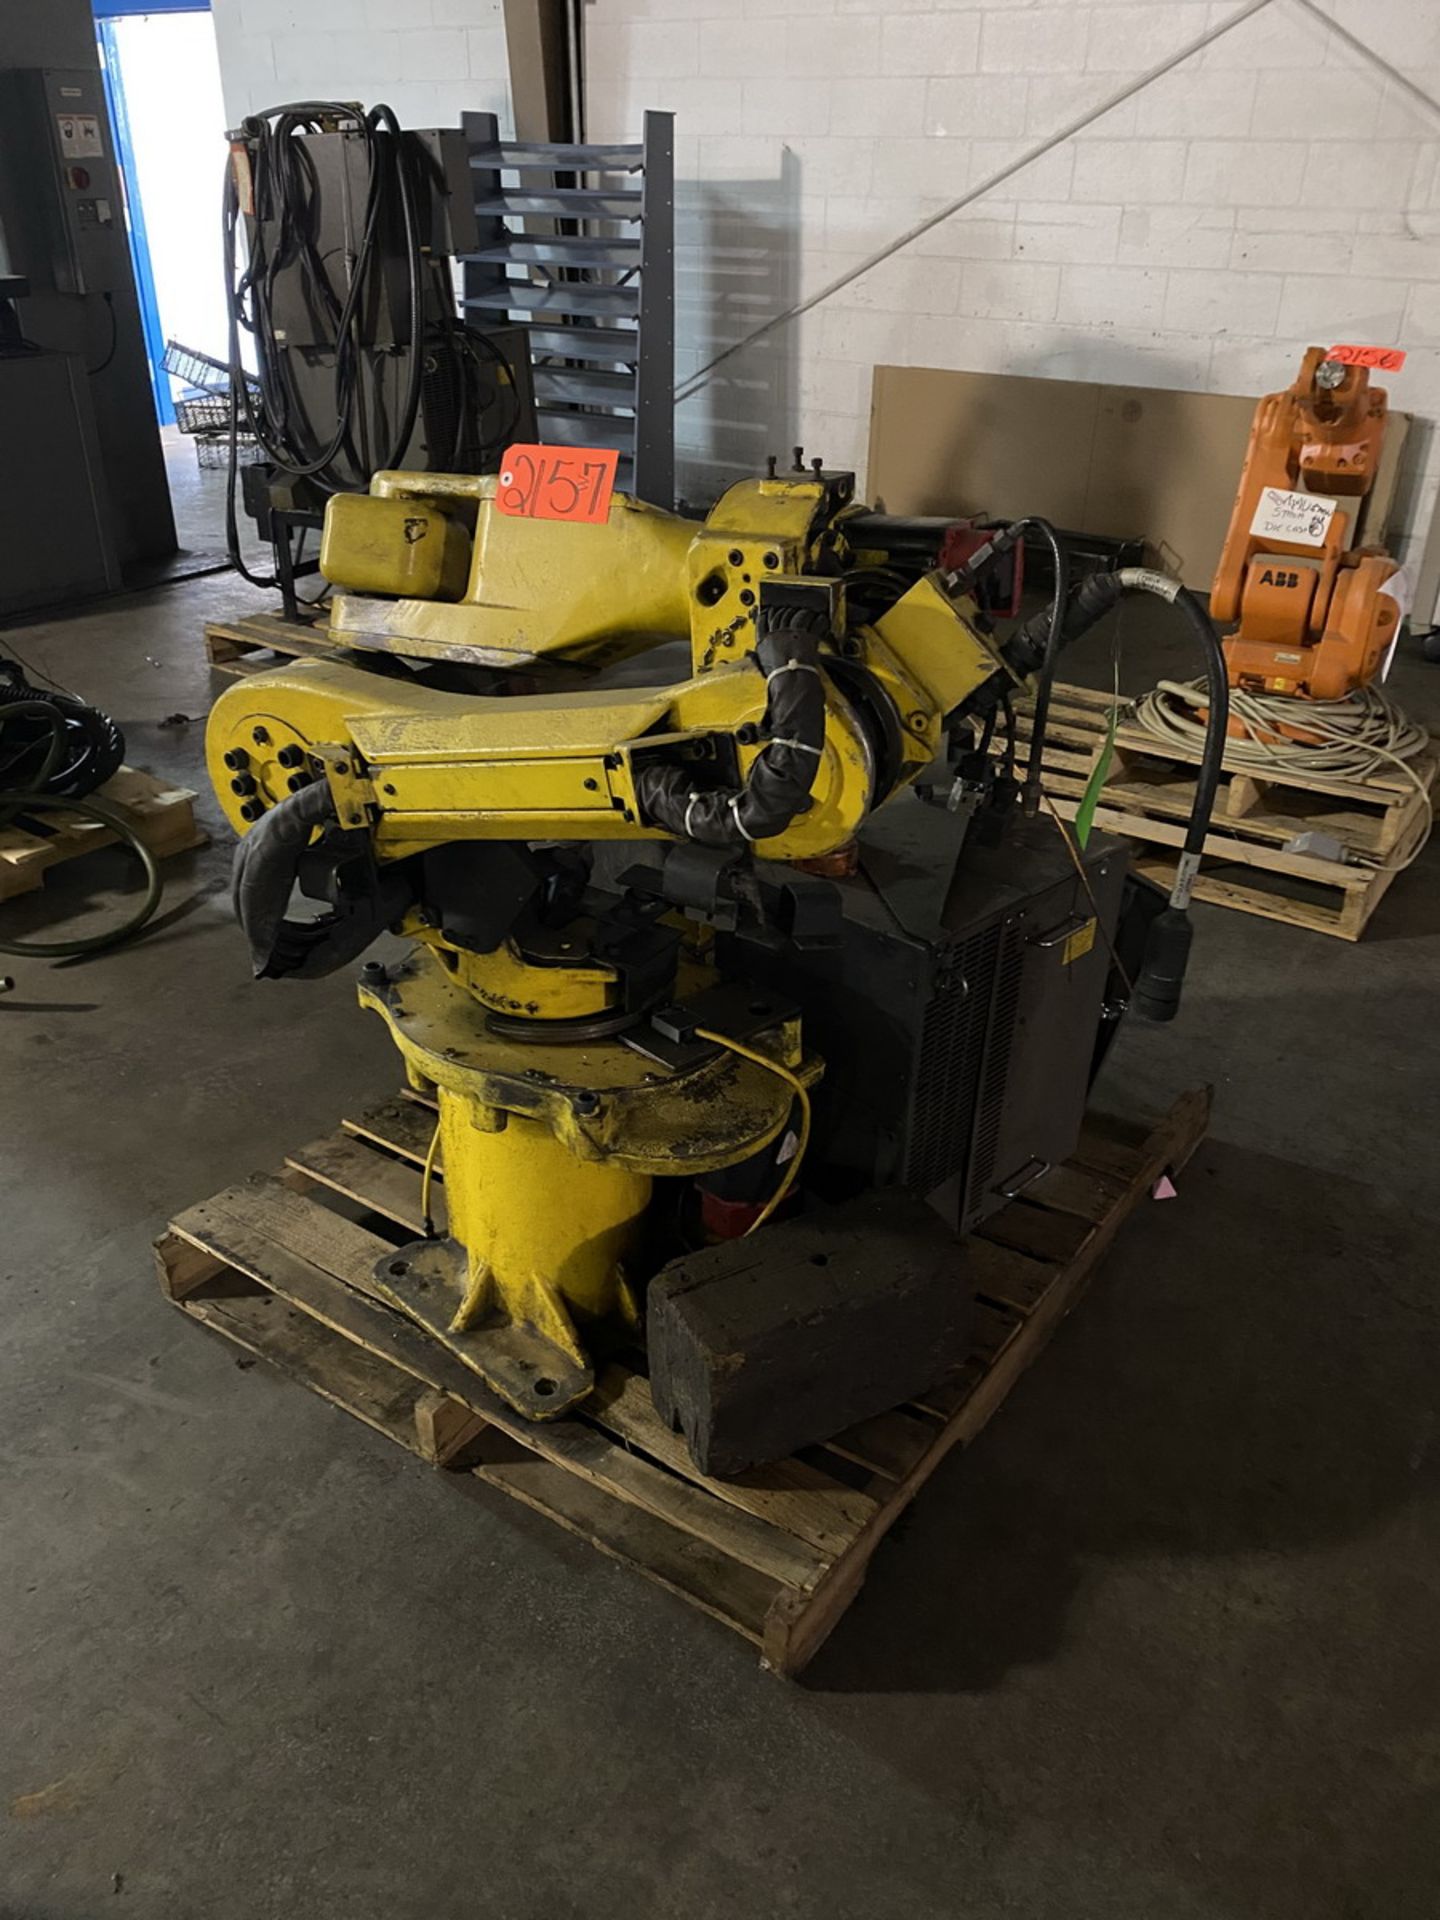 Fanuc 6-Axis Model Arc Mate 100 I Robot Arm; with Fanuc LTD Power Supply